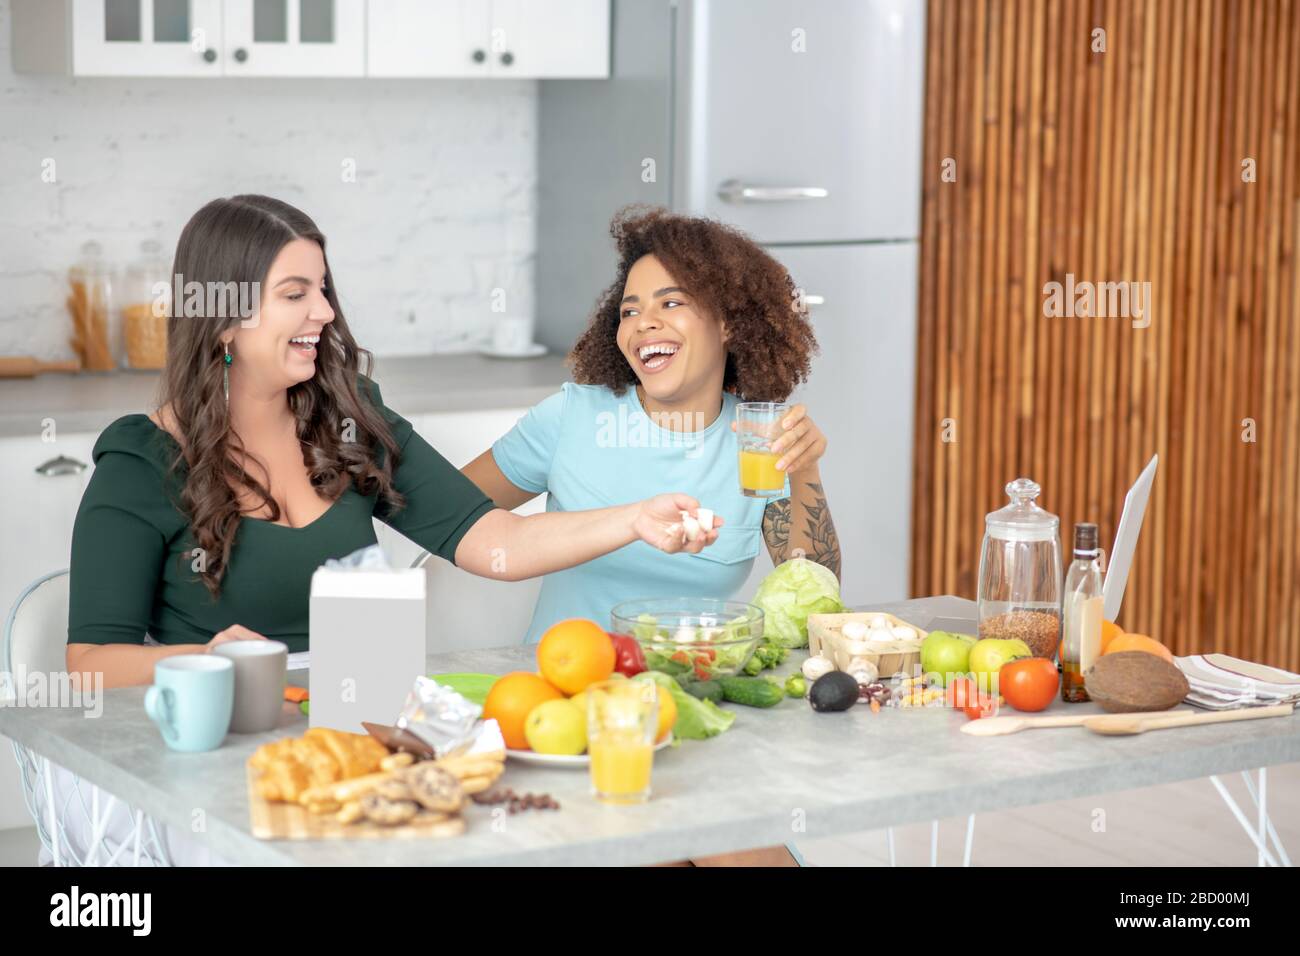 Two young women happily chatting at the kitchen table. Stock Photo